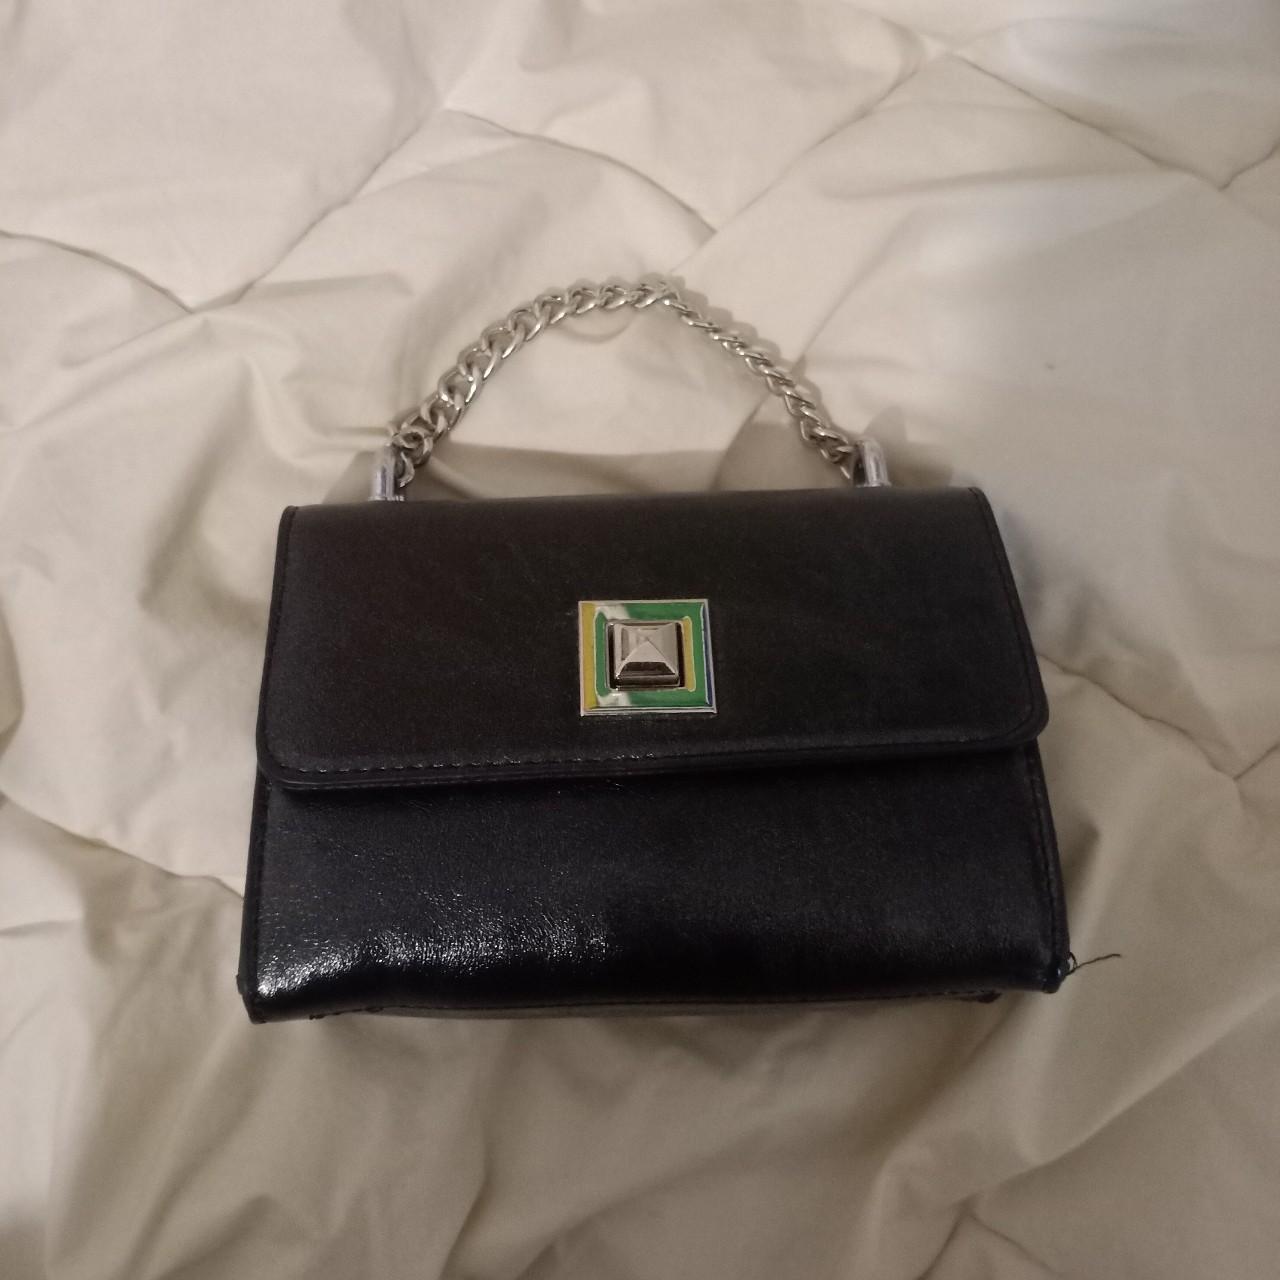 Fake leather bag with metal clasp and inner pocket - Depop